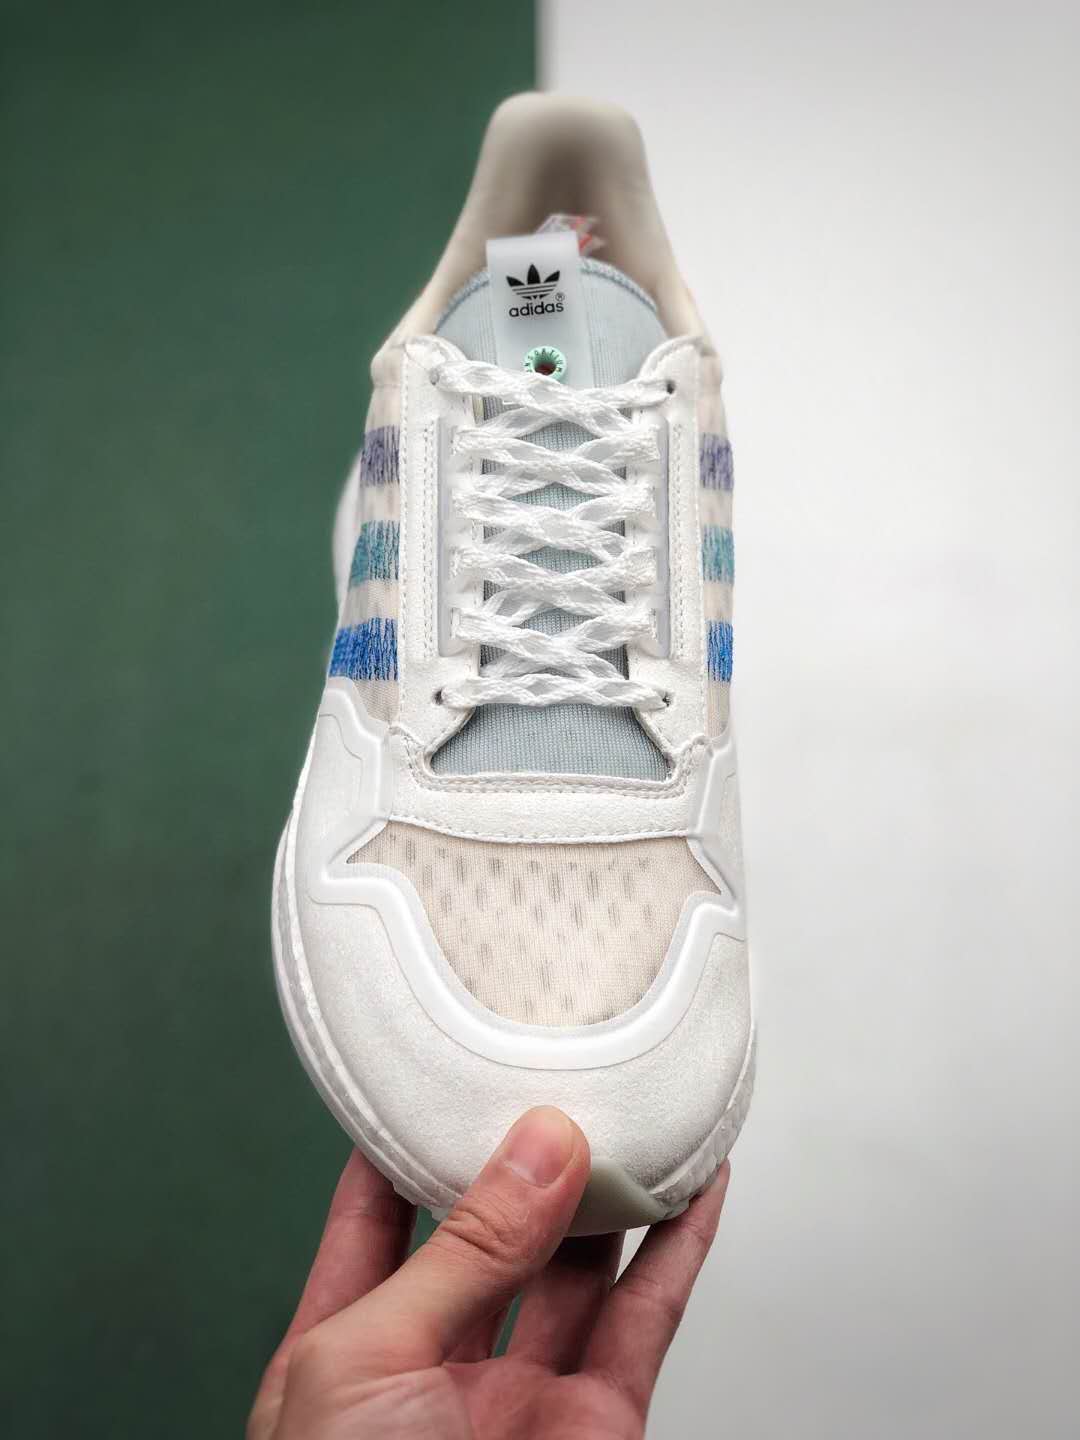 Adidas Commonwealth x ZX 500 RM Coastal Living DB3510 - Limited Edition Sneakers